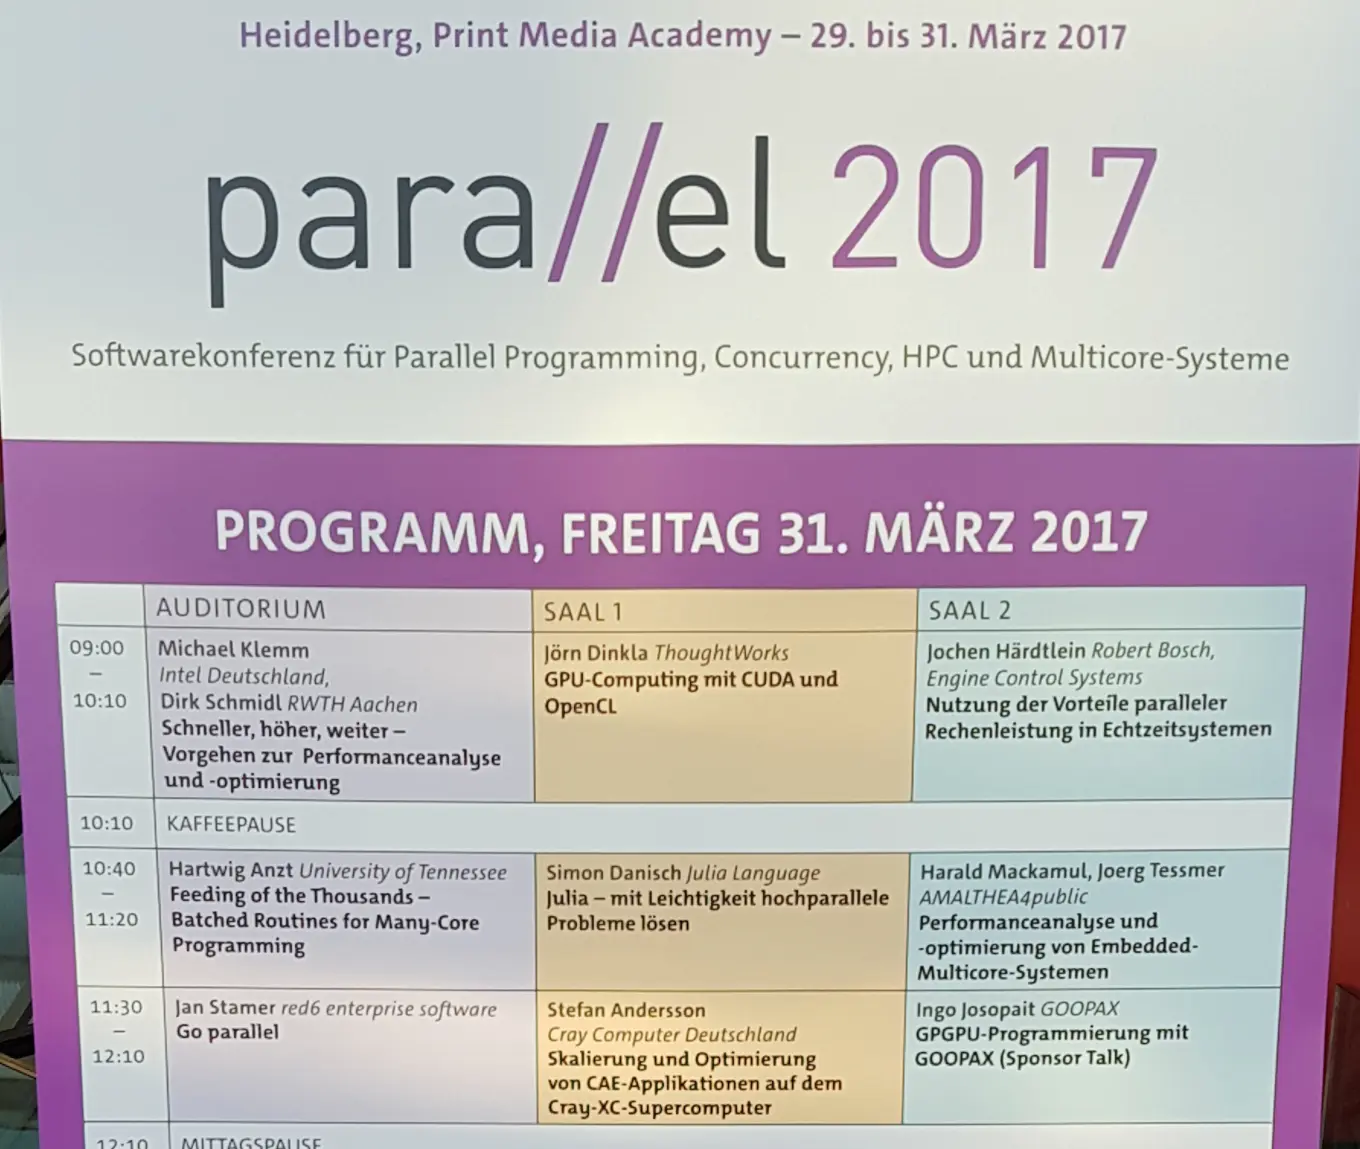 Program of the parallel 2017